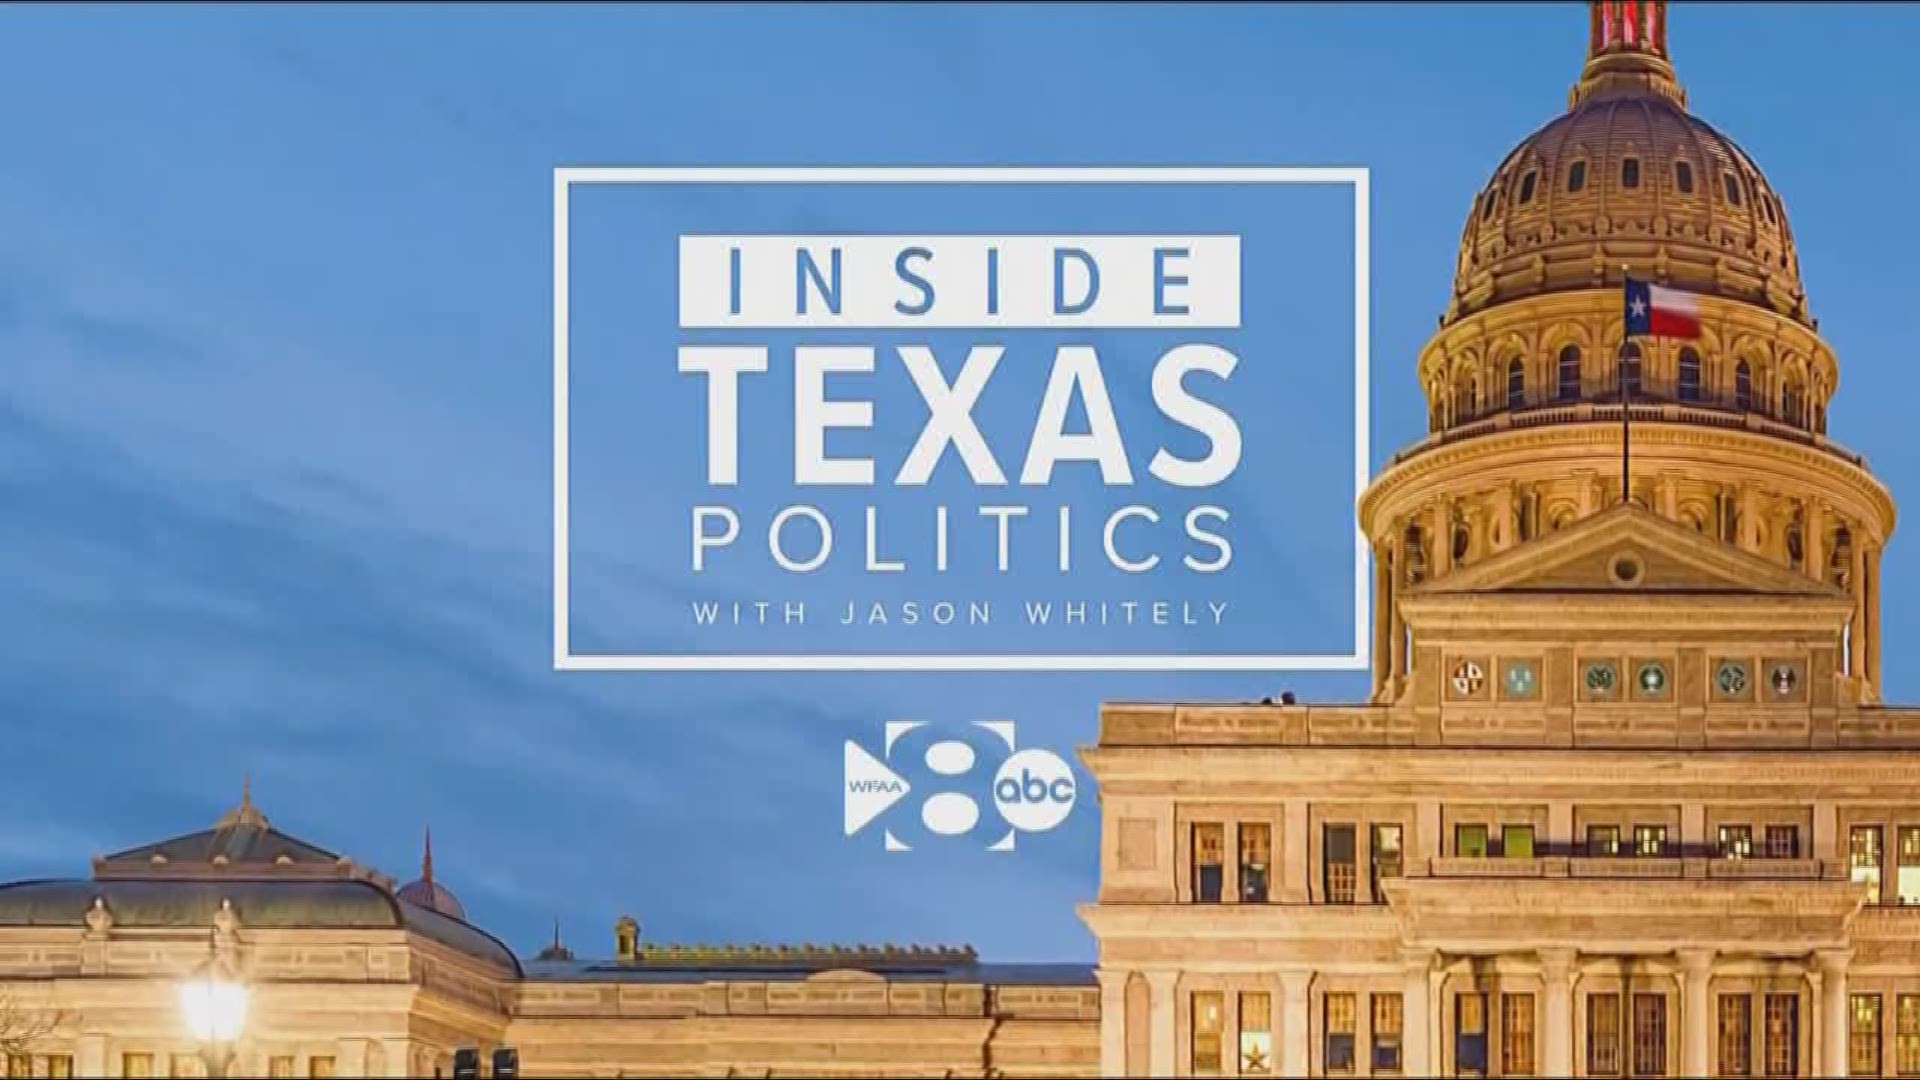 Inside Texas Politics began with a focus on the Dallas Independent School District.